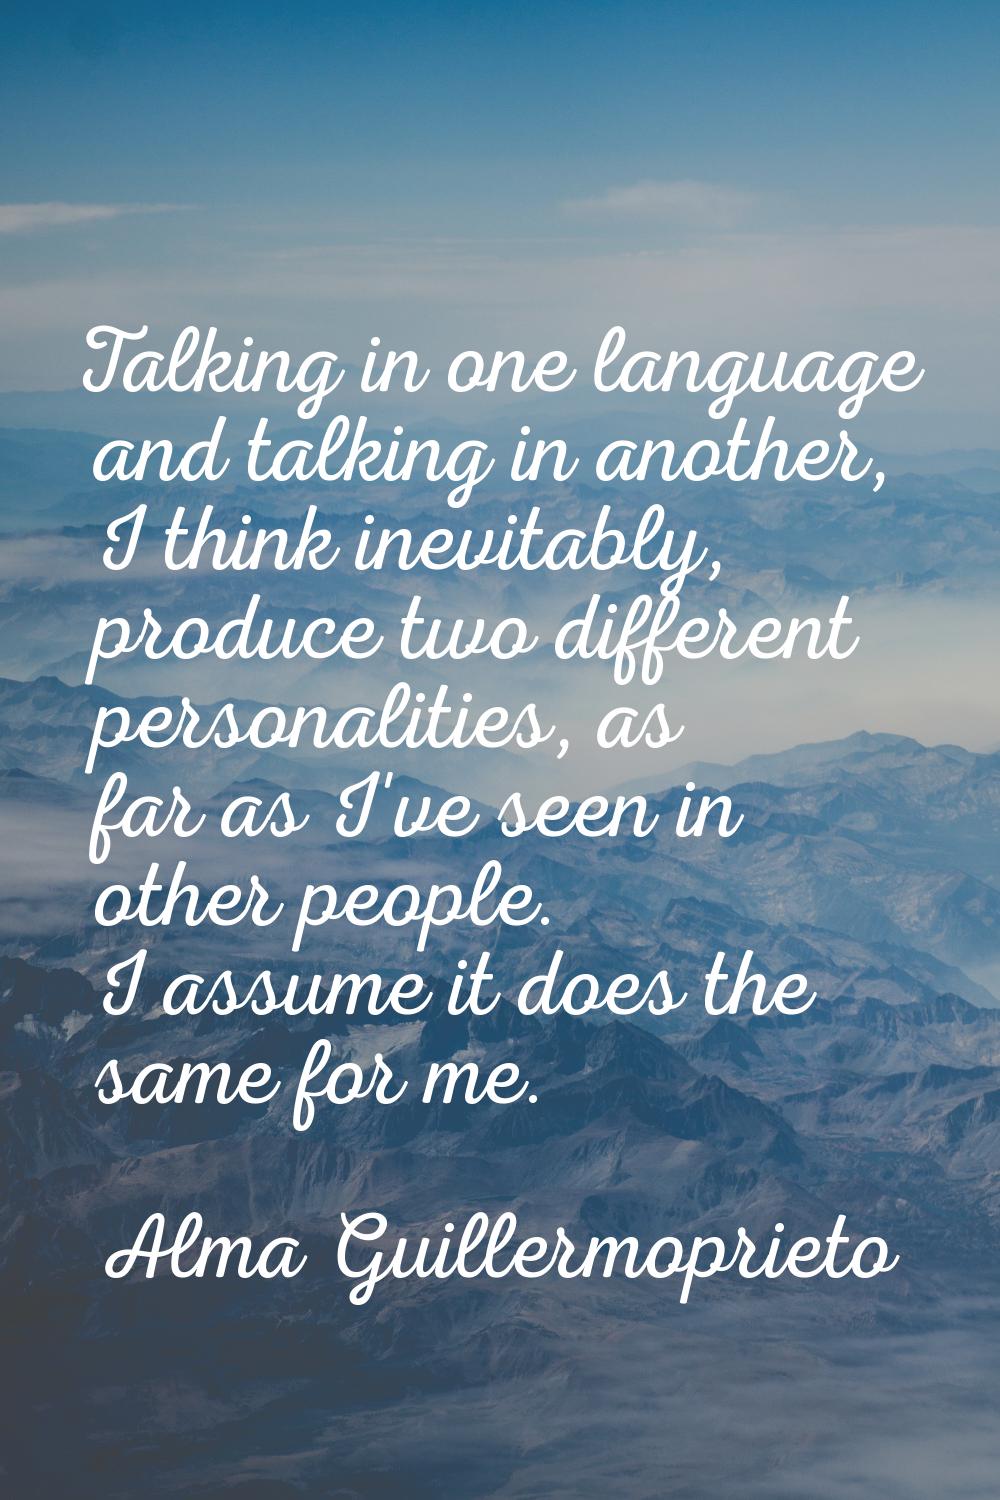 Talking in one language and talking in another, I think inevitably, produce two different personali